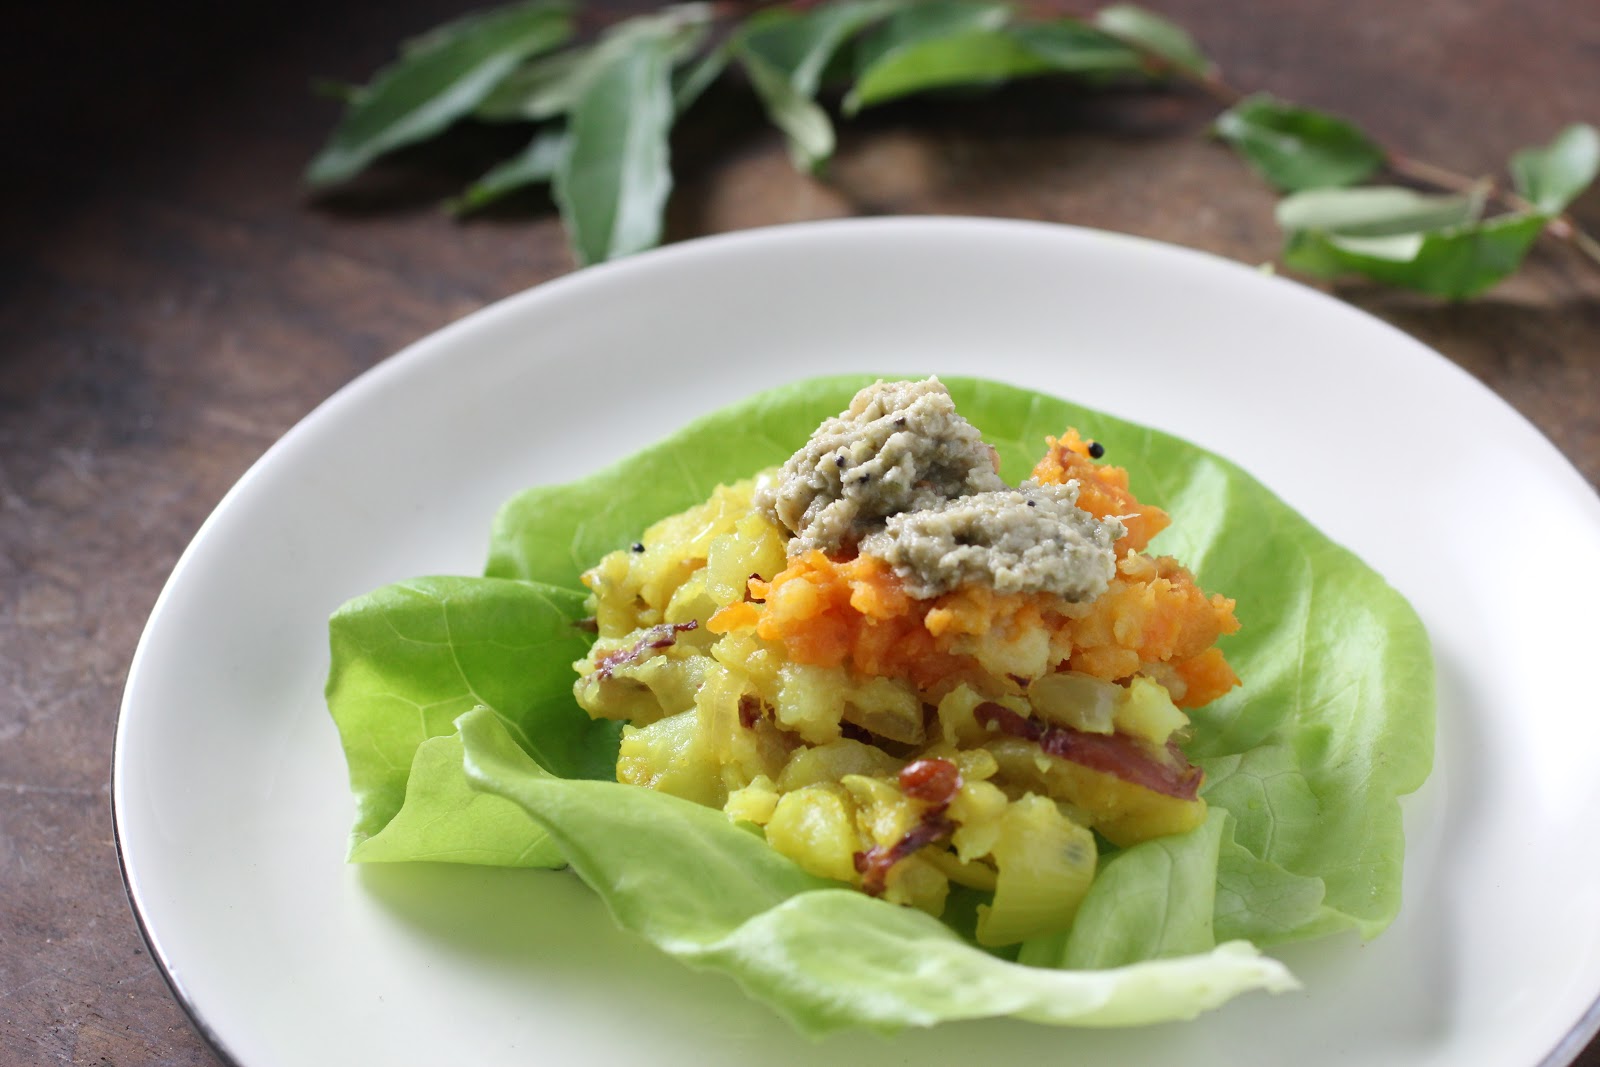 butter lettuce filled with South Indian potato curry and coconut chutney